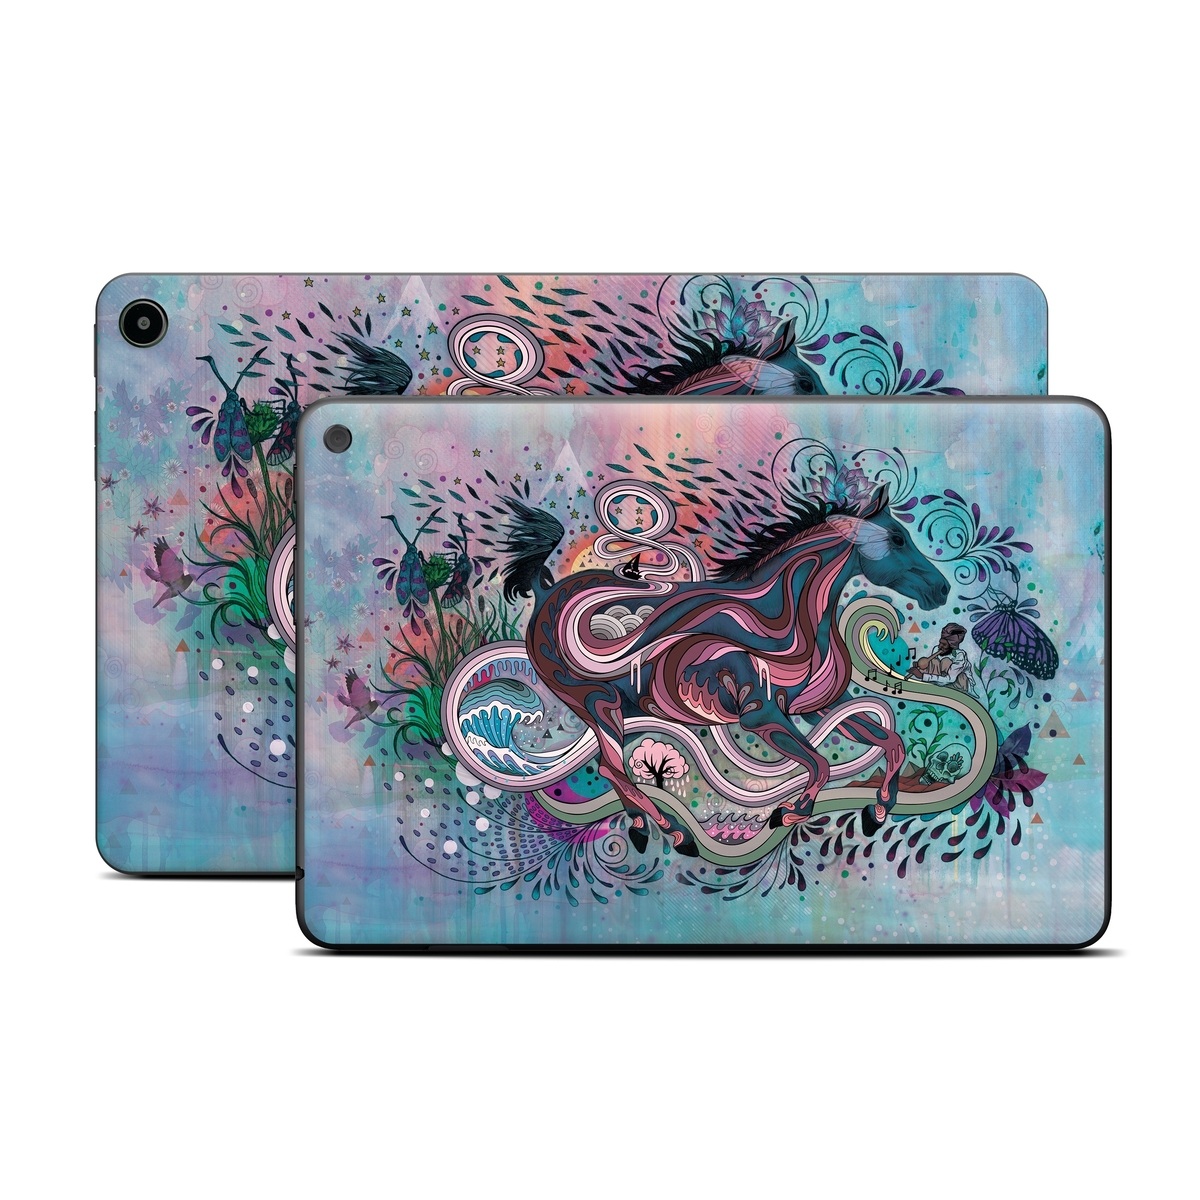 Amazon Fire Tablet Series Skin Skin design of Illustration, Art, Visual arts, Graphic design, Fictional character, Psychedelic art, Pattern, Drawing, Painting, Mythology, with gray, black, blue, red, purple colors